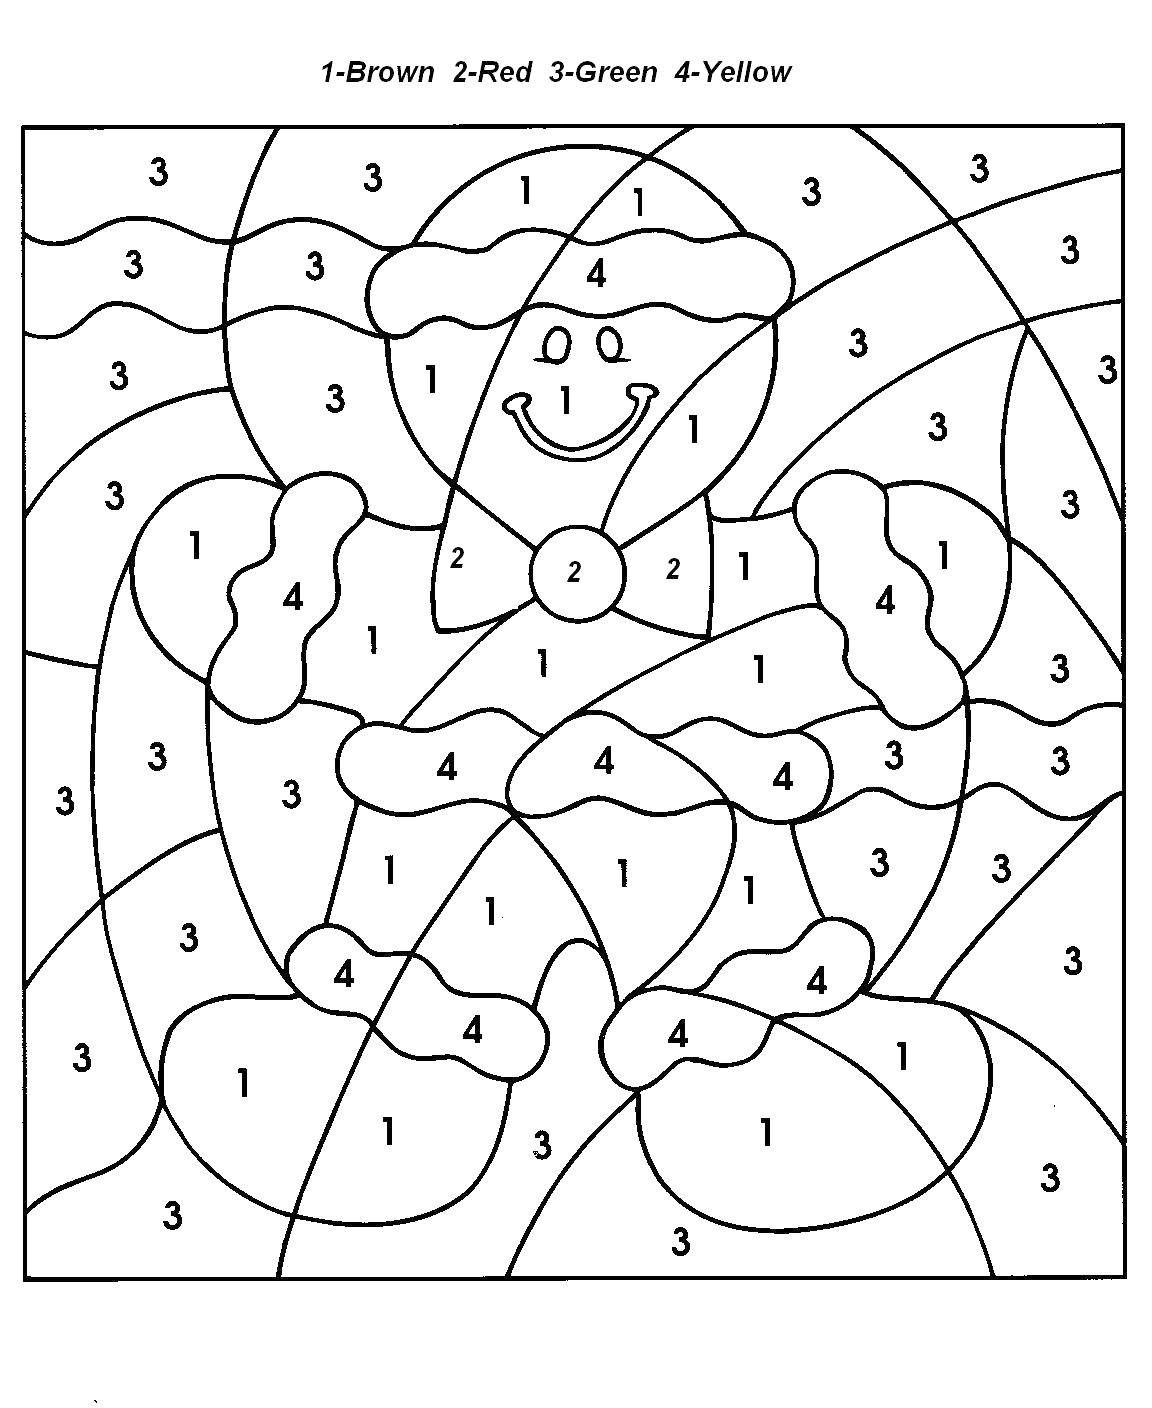 Coloring Color by numbers gingerbread man. Category That number. Tags:  The sample numbers.